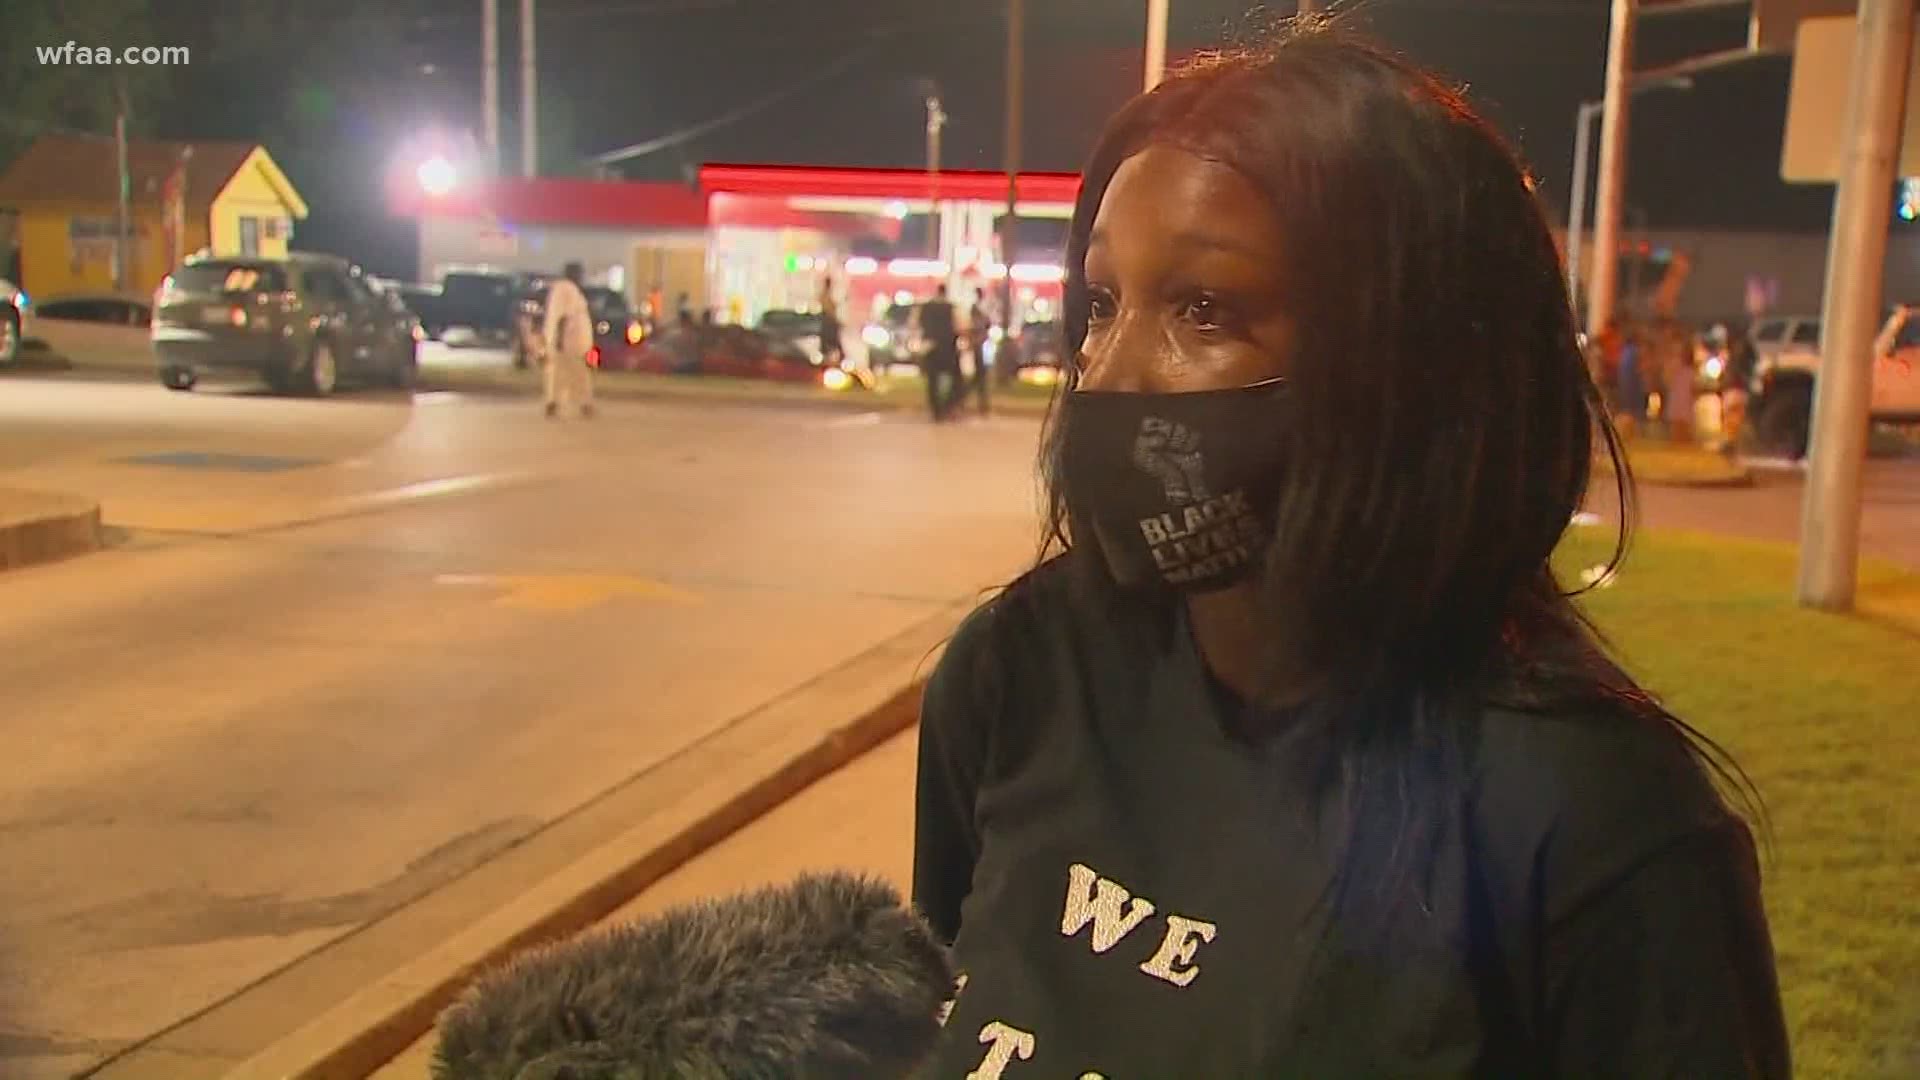 A 19-year-old Whataburger employee says wearing a Black Live Matter mask got her fired after a customer complained.